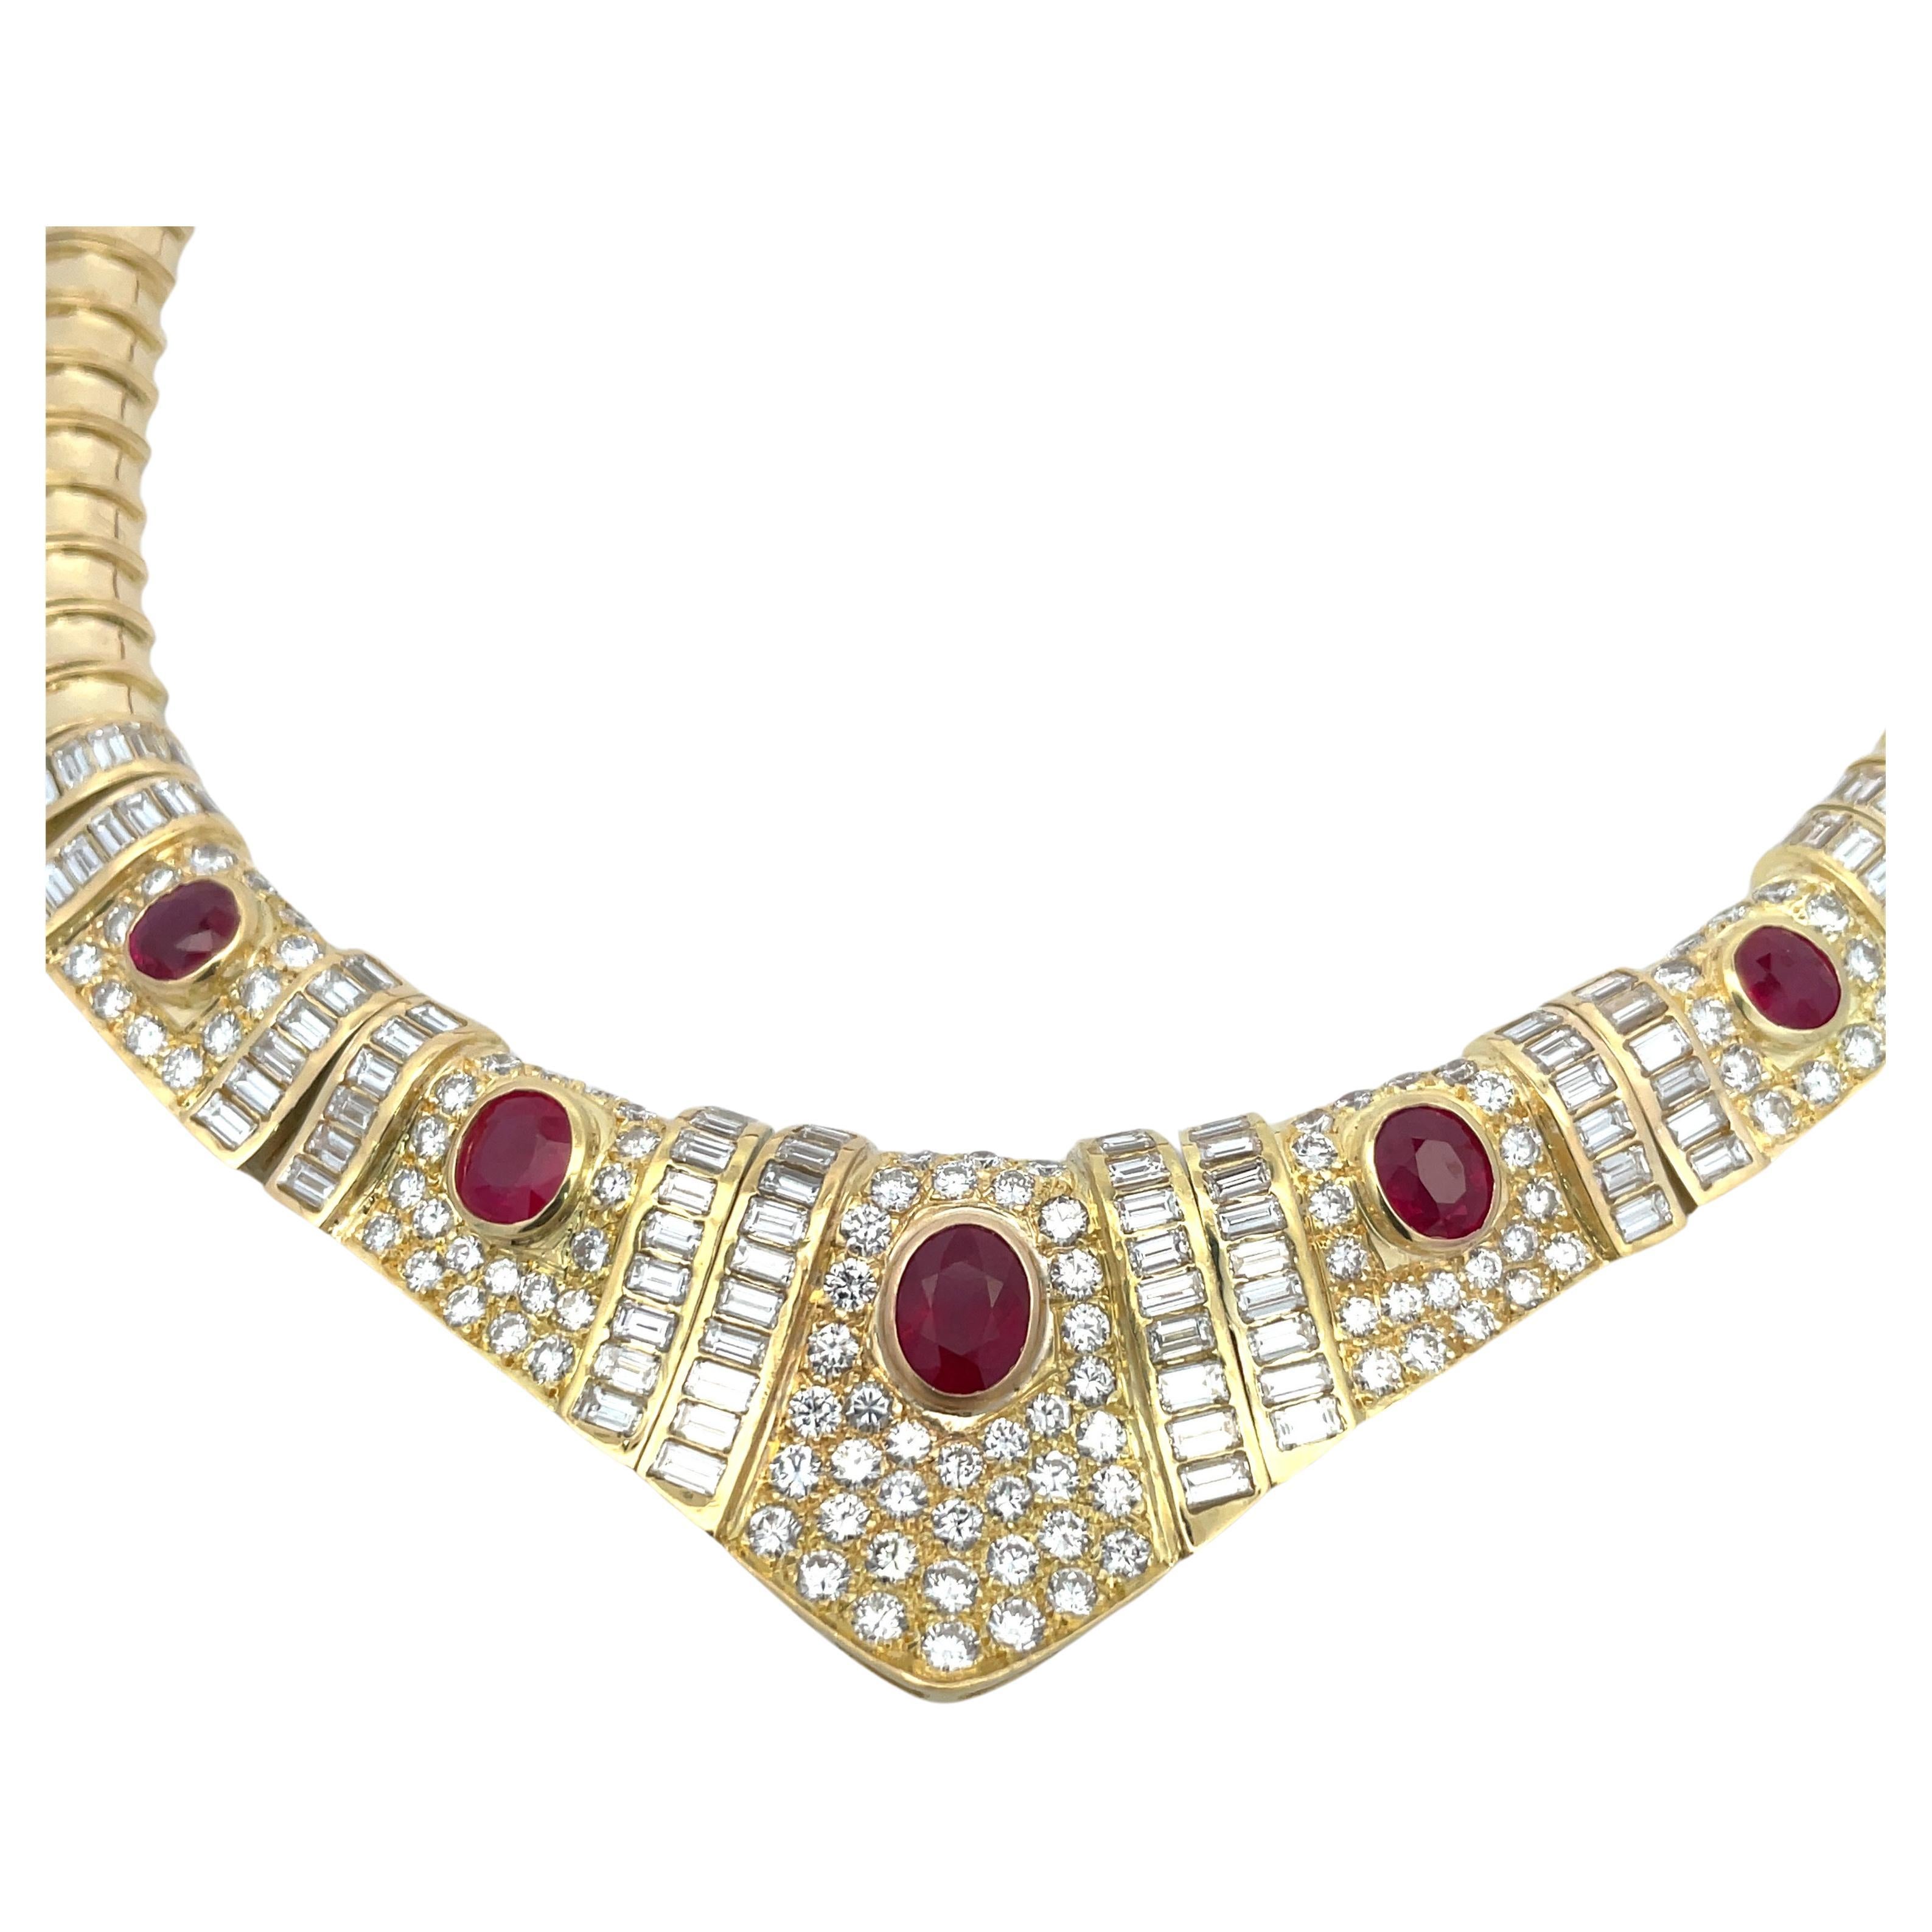 Certified Burma Ruby Diamond Collar Necklace 24.50 Carats 18 Karat Yellow Gold In Excellent Condition For Sale In New York, NY